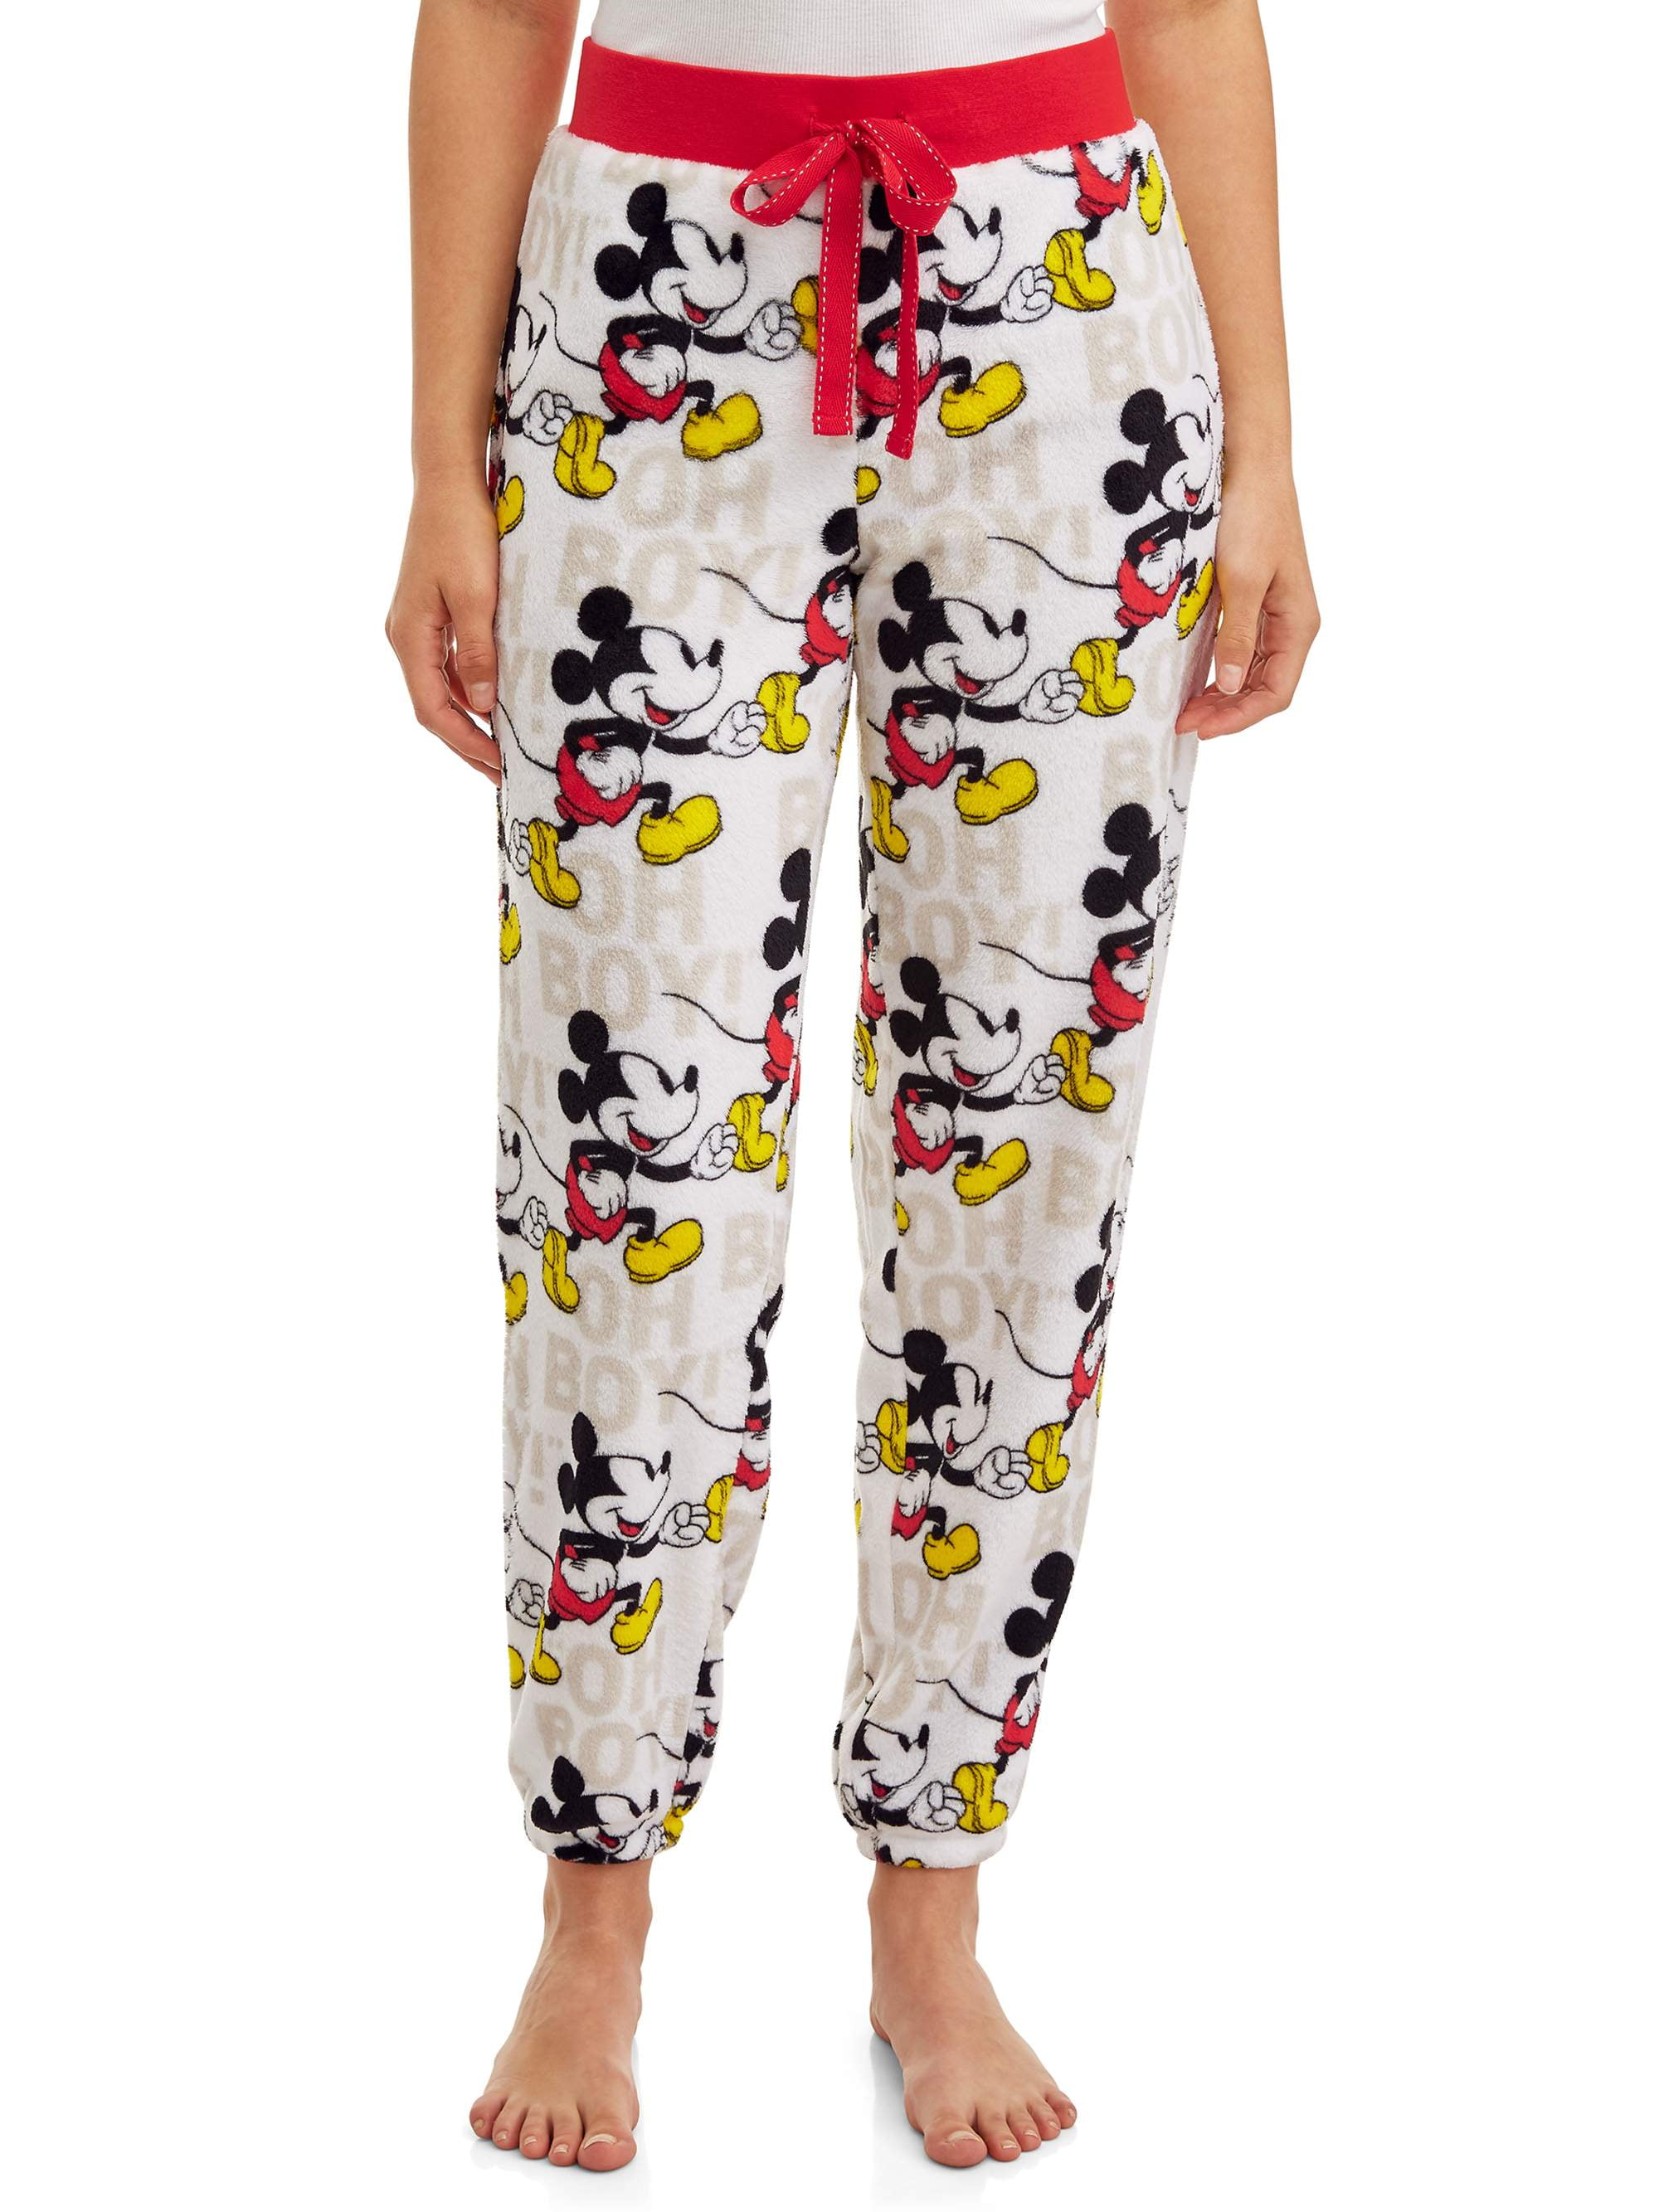 Disney Mickey Mouse Womens Pajama Pant with Classic Mickey Print Red White 